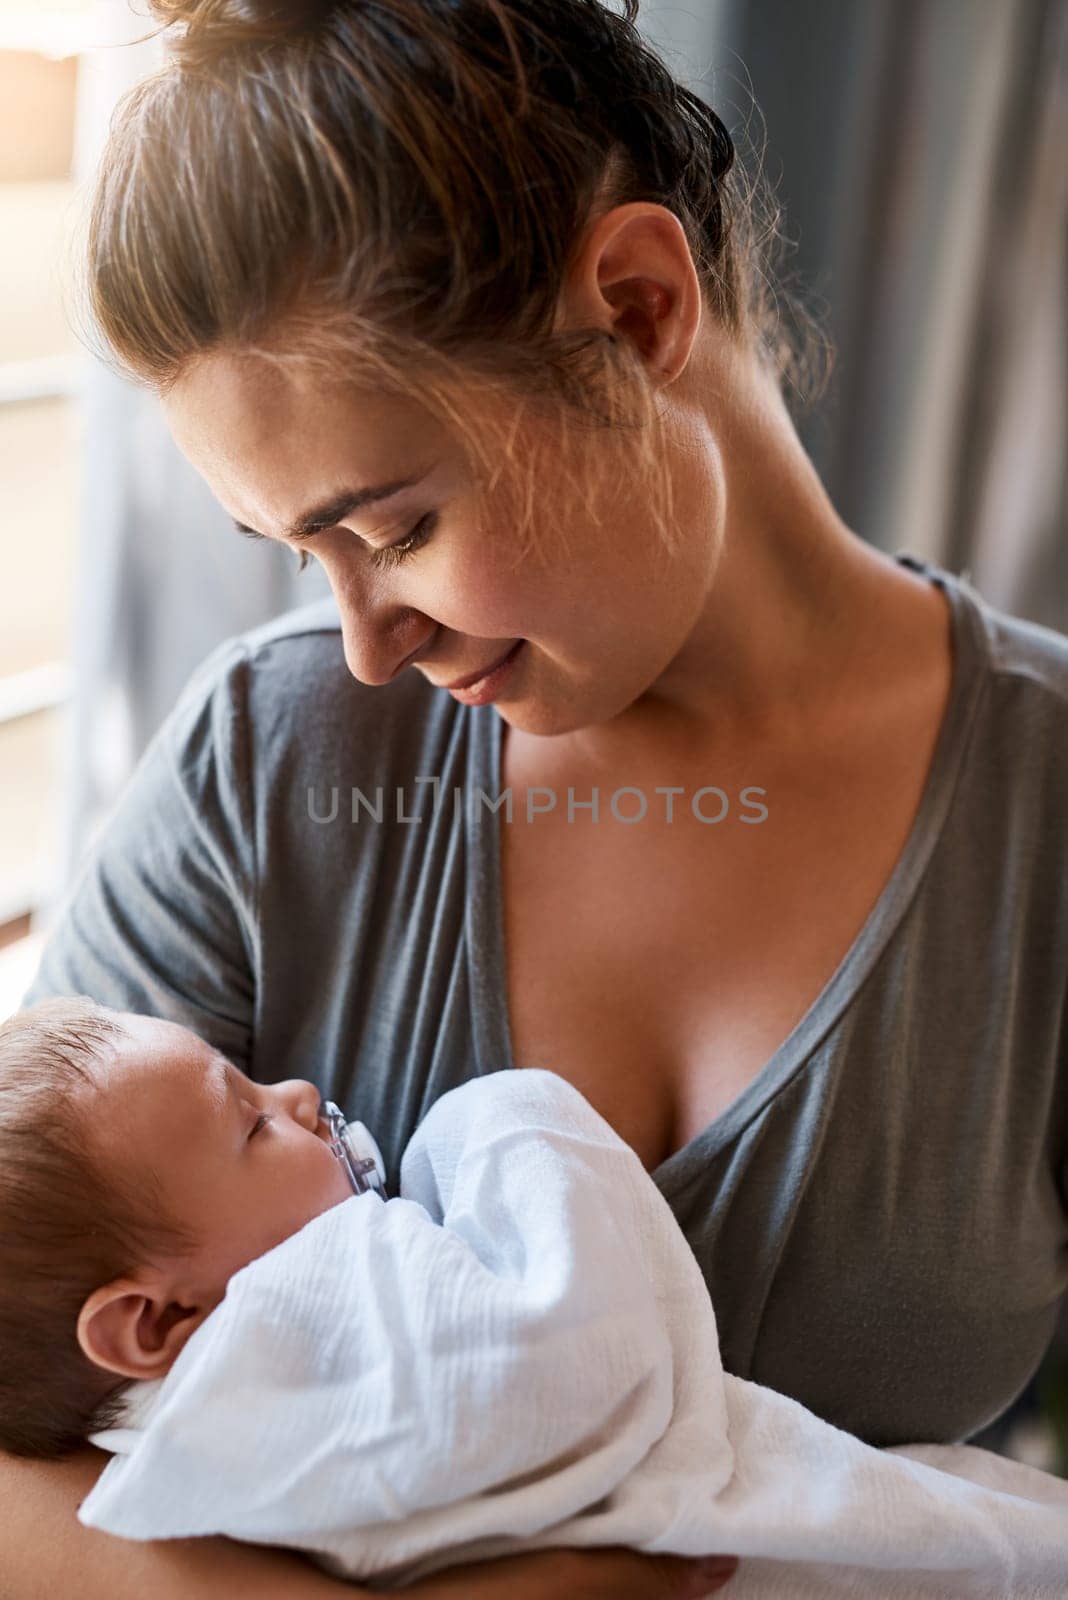 I could stare at him for hours. a young woman bonding with her baby boy at home